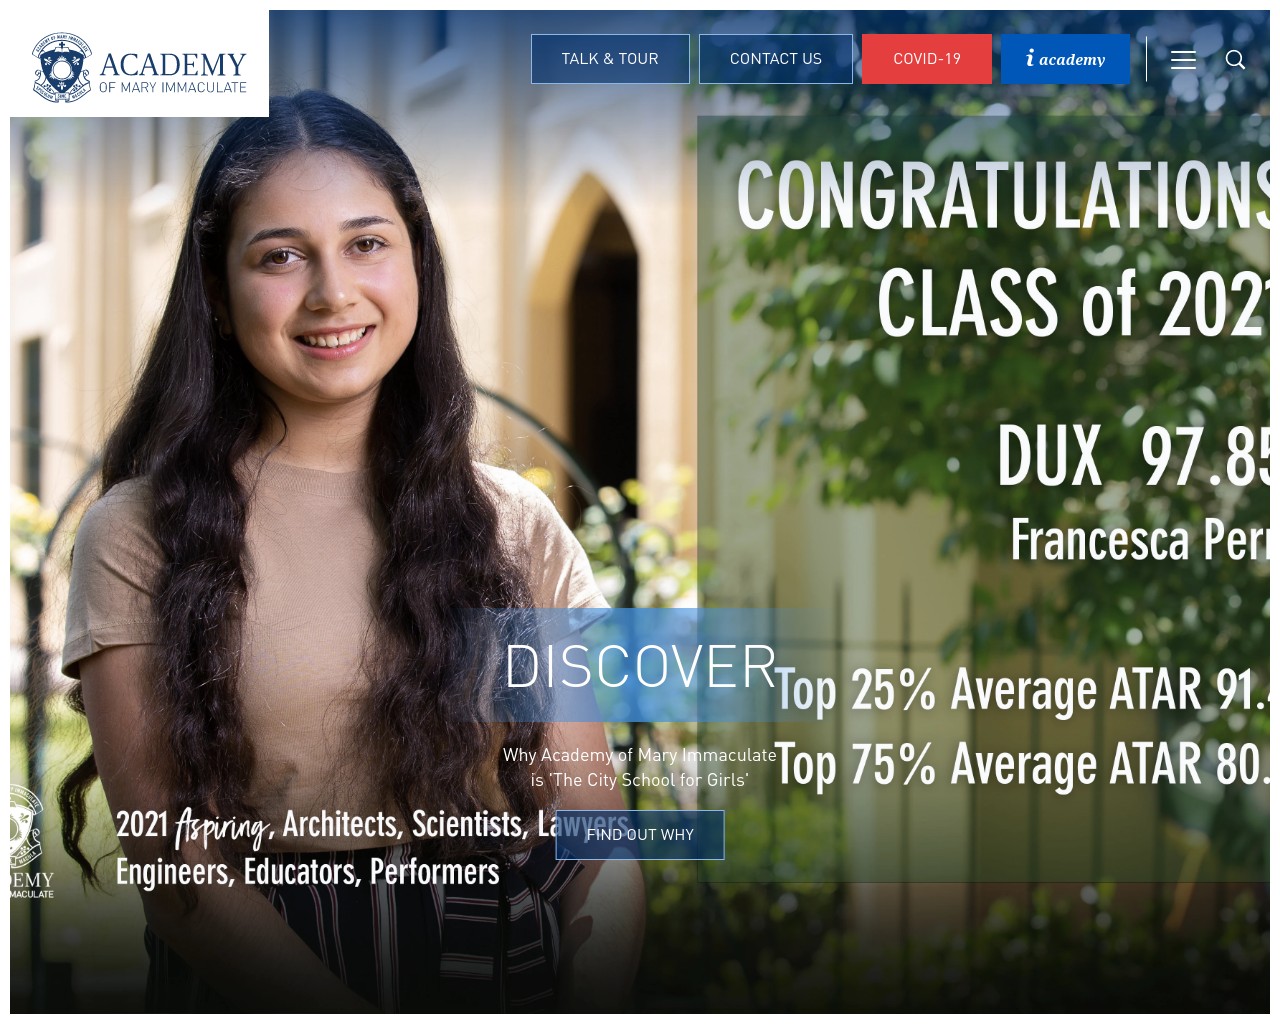 Academy of Mary Immaculate